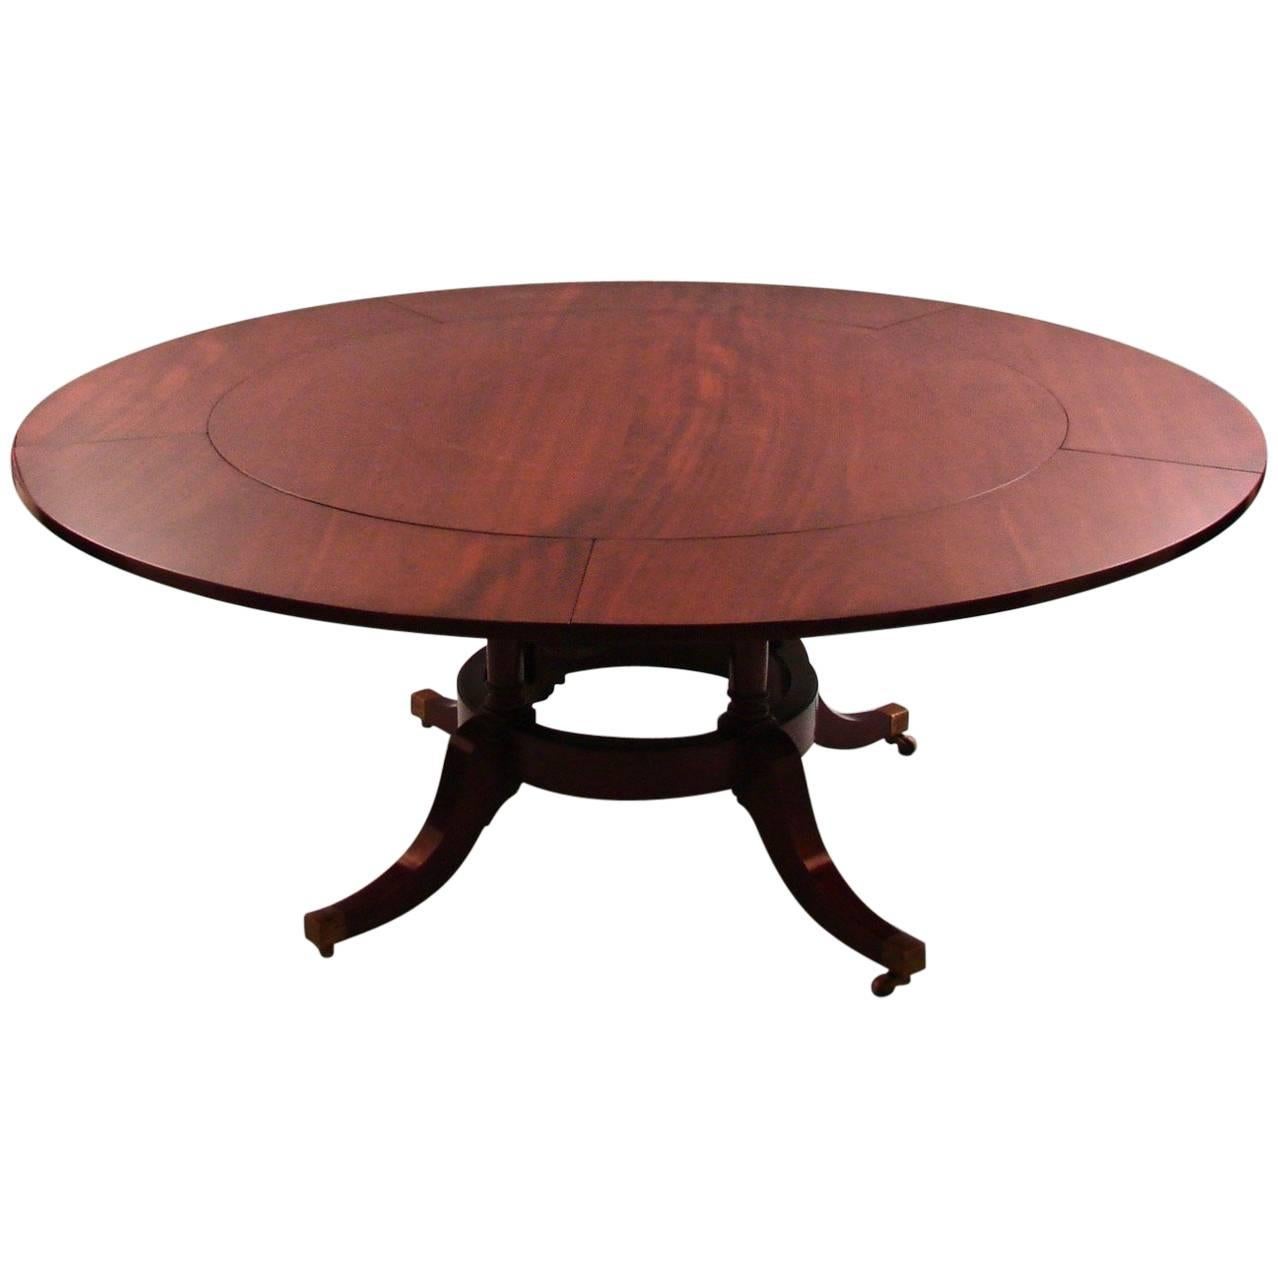 Regency Style Mahogany Dining Table with Five Leaves